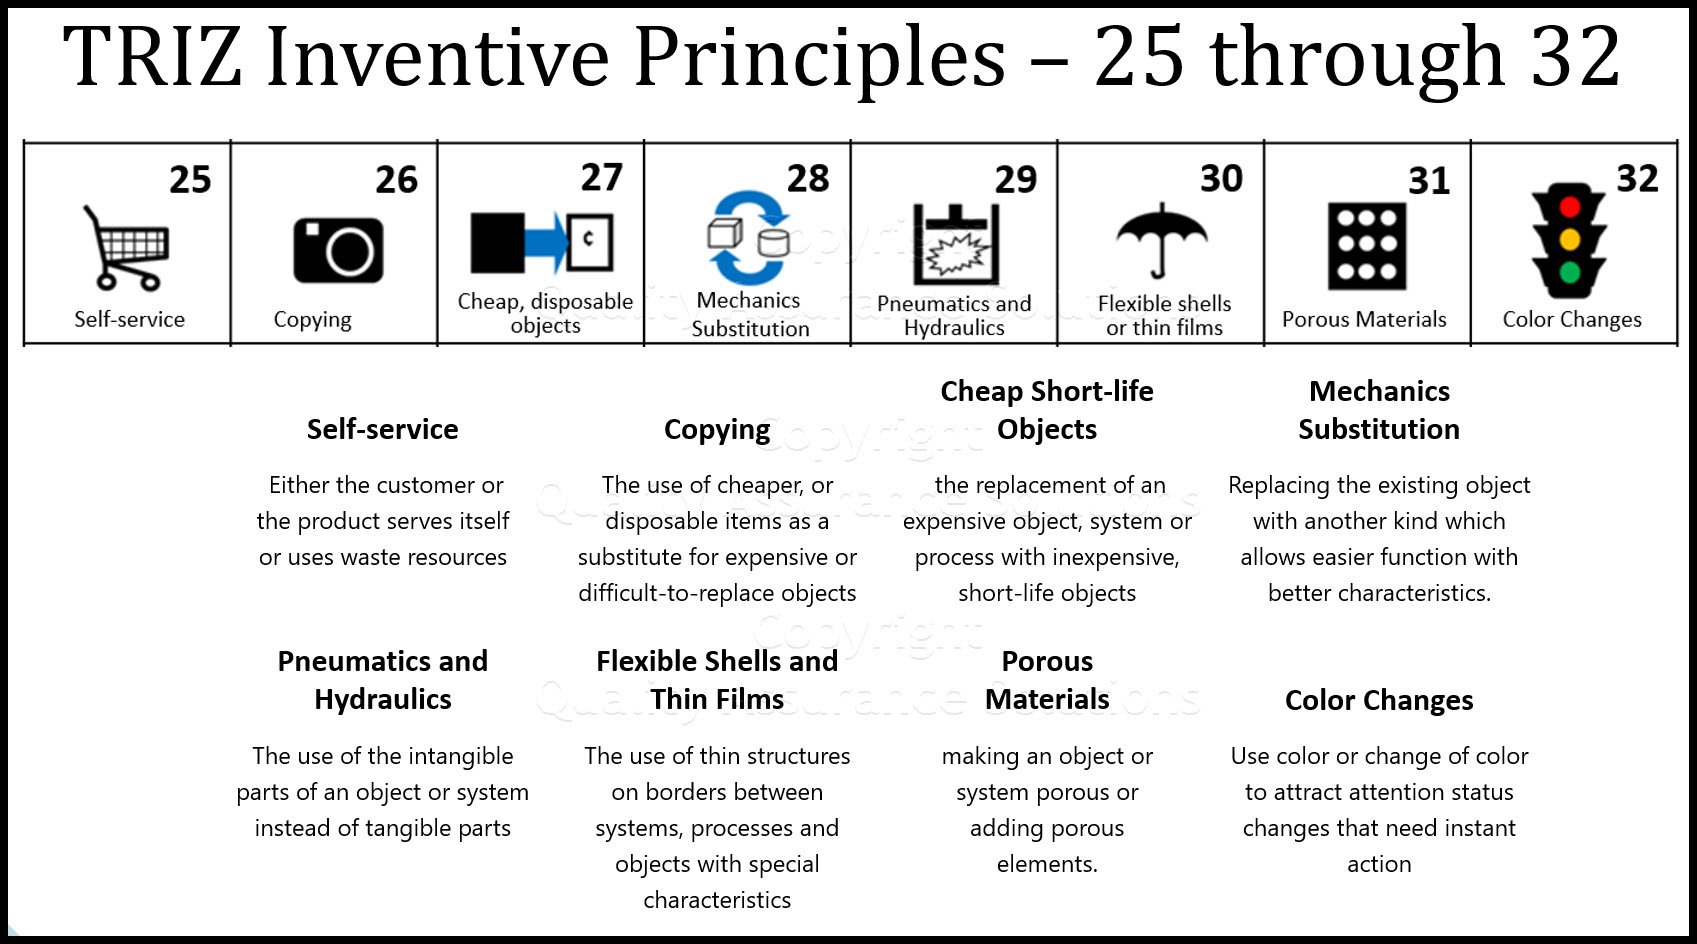 See our detali List of TRIZ Inventive Principles 25 through 32. This covers Self-Service, Copying, Mechanics Substitution, Porous Materias, Color and others.  